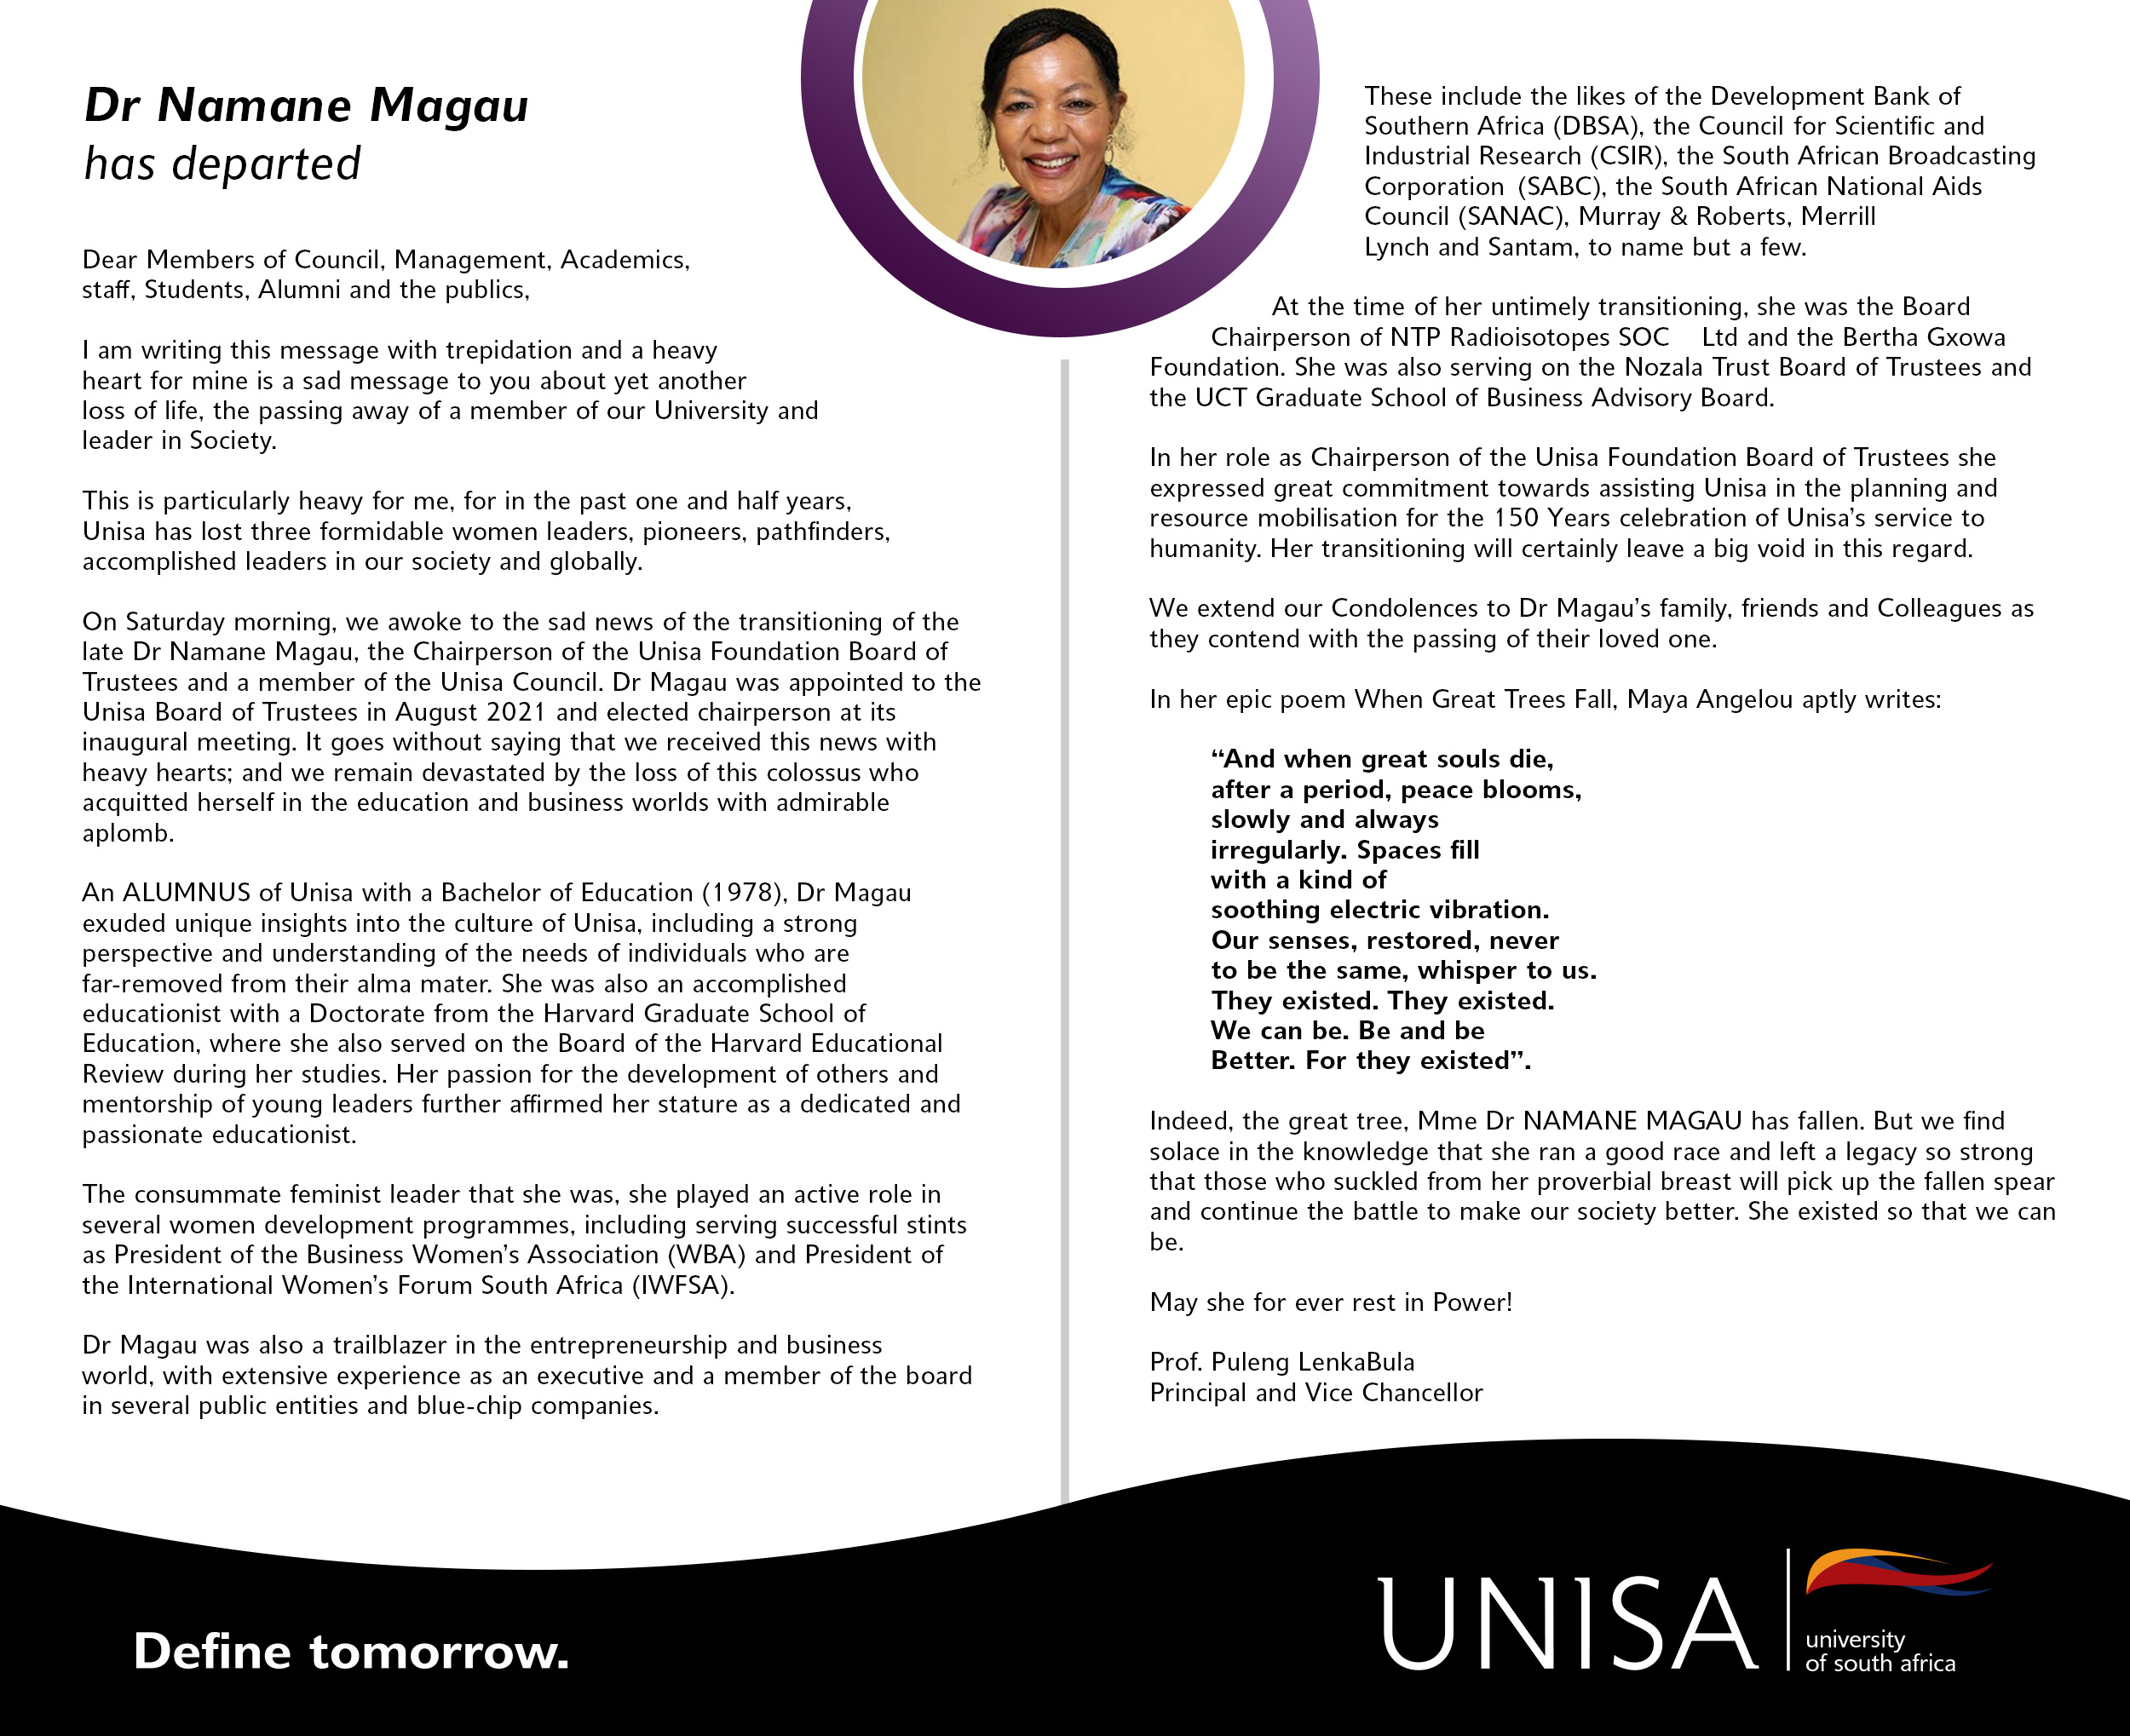 Message of condolence on the passing of Dr Namane Magau